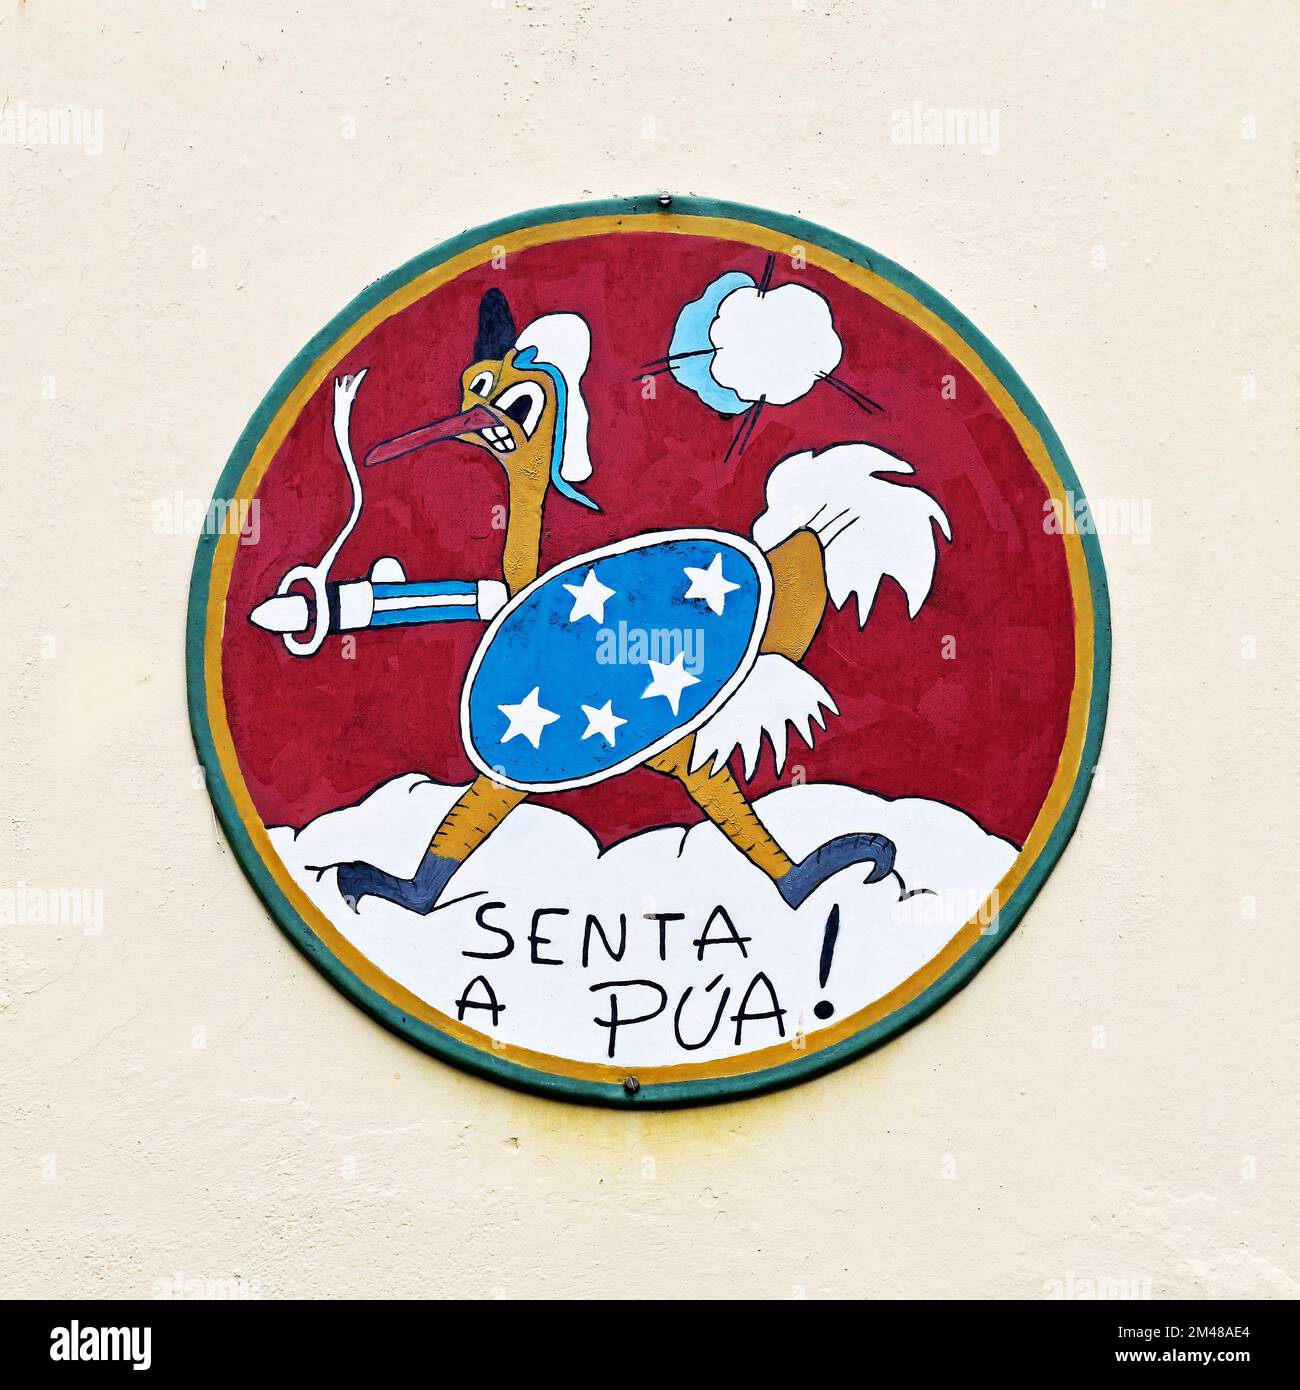 PETROPOLIS, RIO DE JANEIRO, BRAZIL - October 28, 2022: Insignia of the 1st Fighter Aviation Group painted on the wall. 'Senta a Púa' (Send a Bullet) Stock Photo